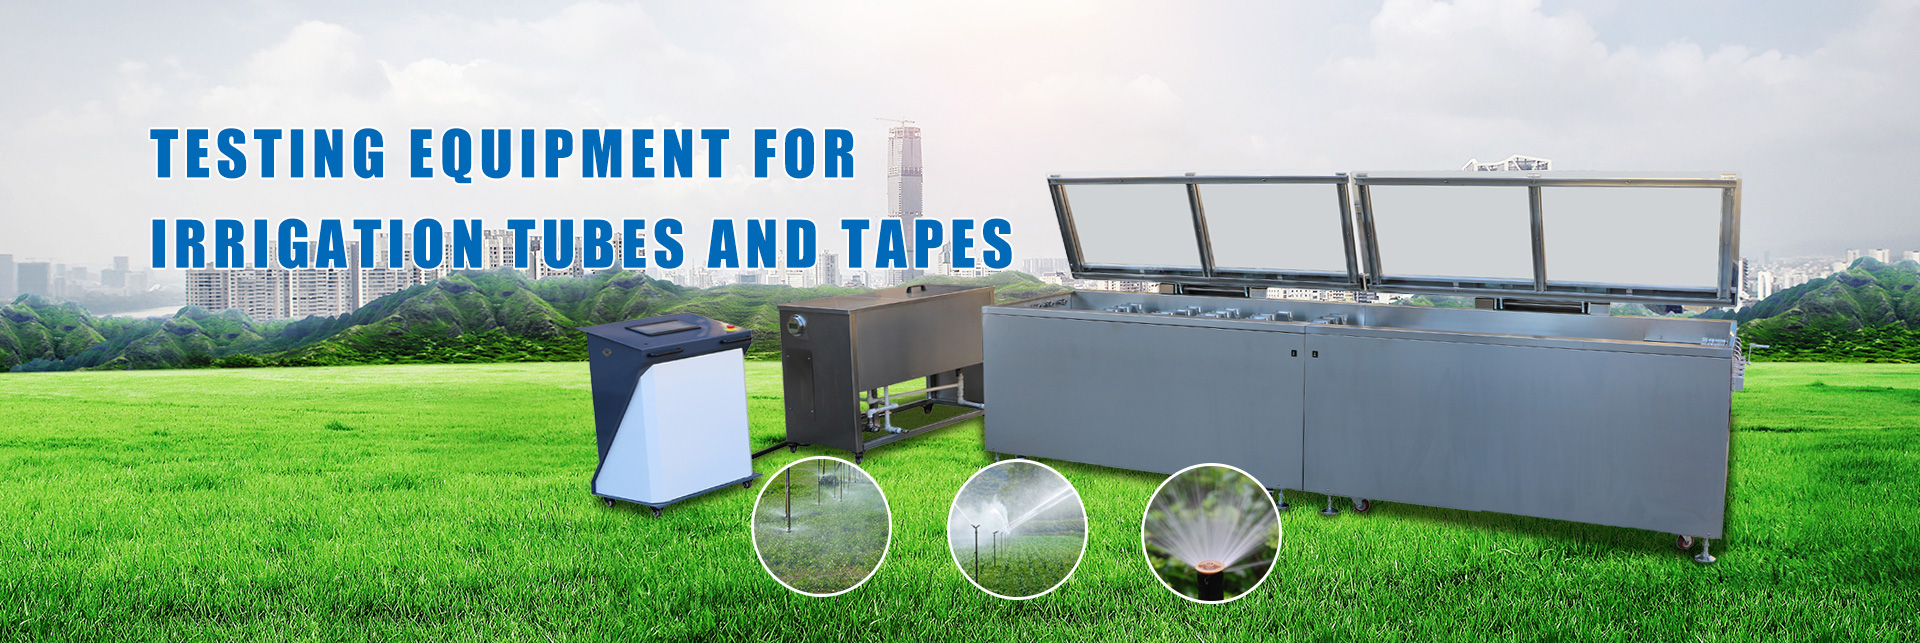 banner-irrigation tube and tapes testing equipment